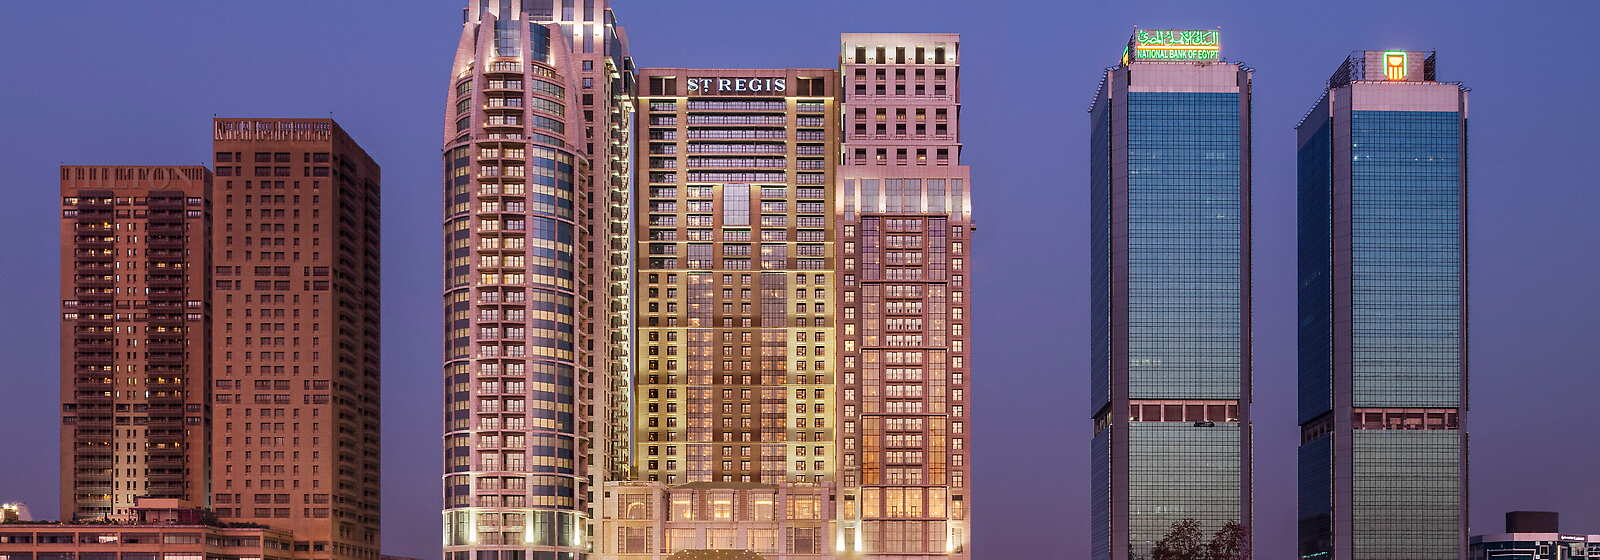 The iconic St. Regis Cairo rises tall, overlooking the timeless river Nile and the bustling city of CairO.